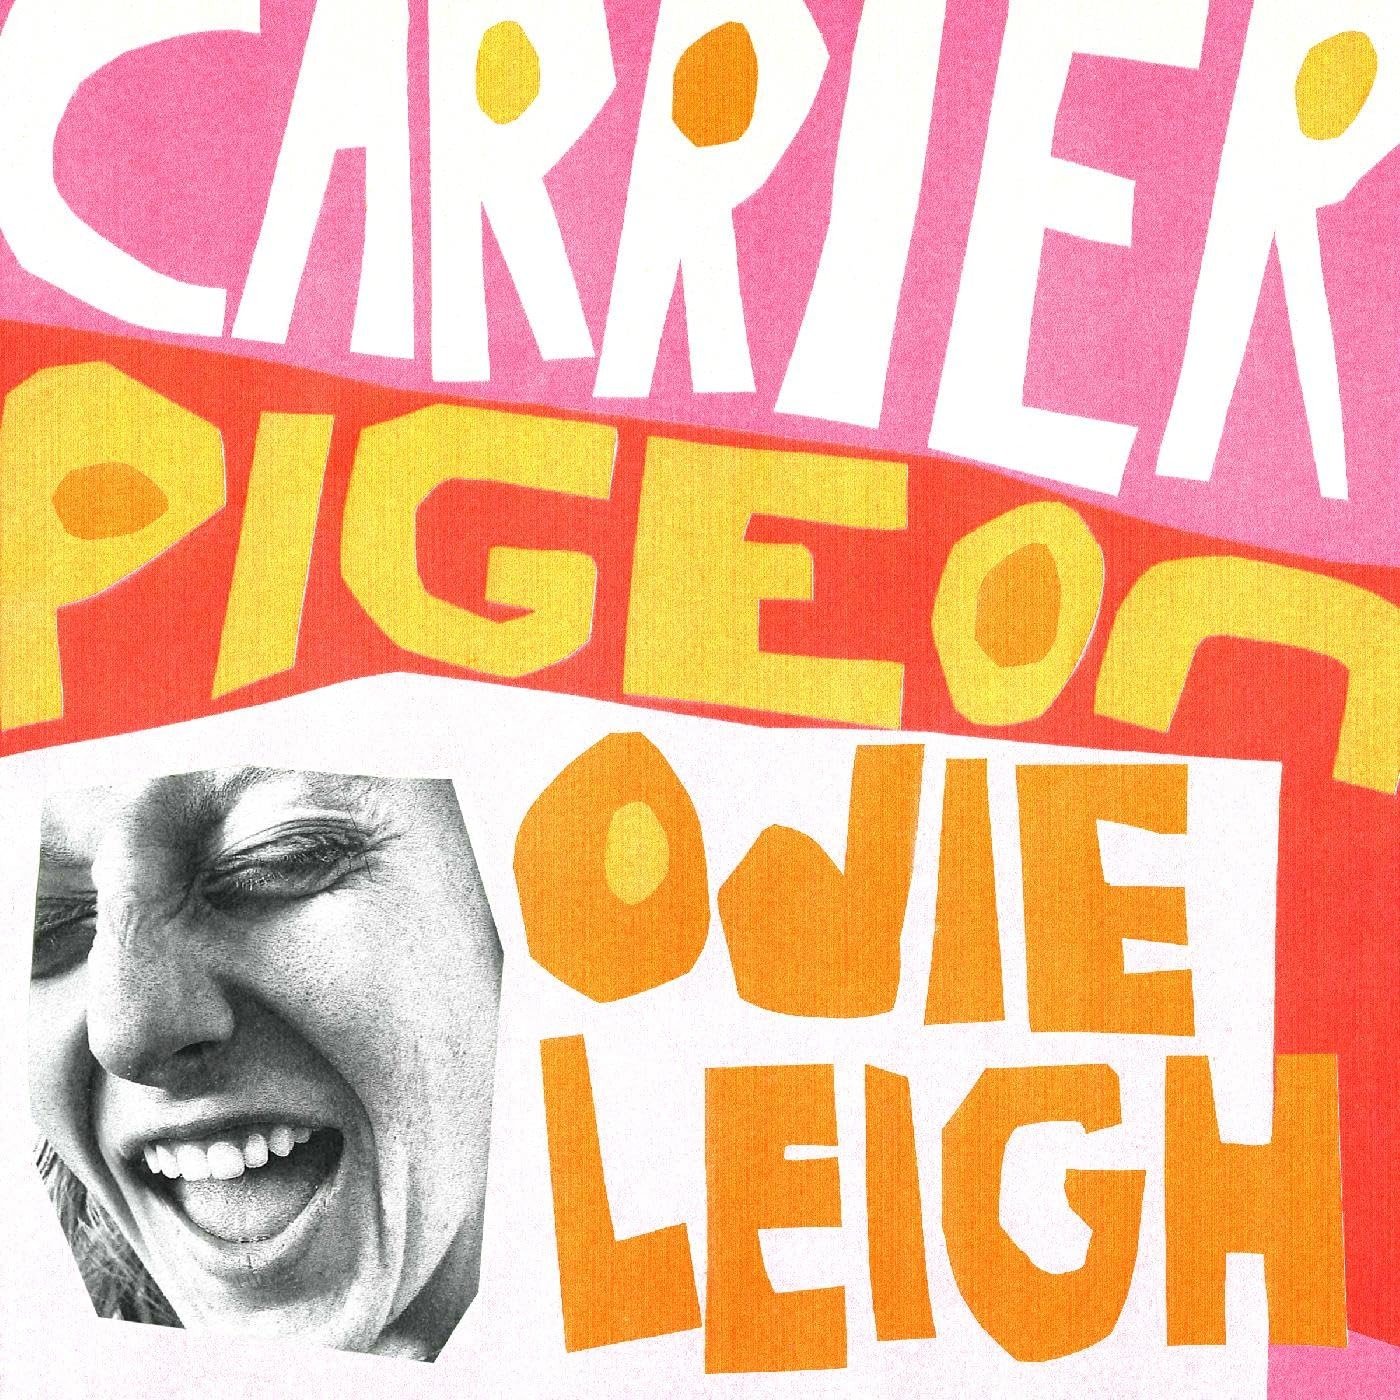 CD Shop - LEIGH, ODIE CARRIER PIGEON